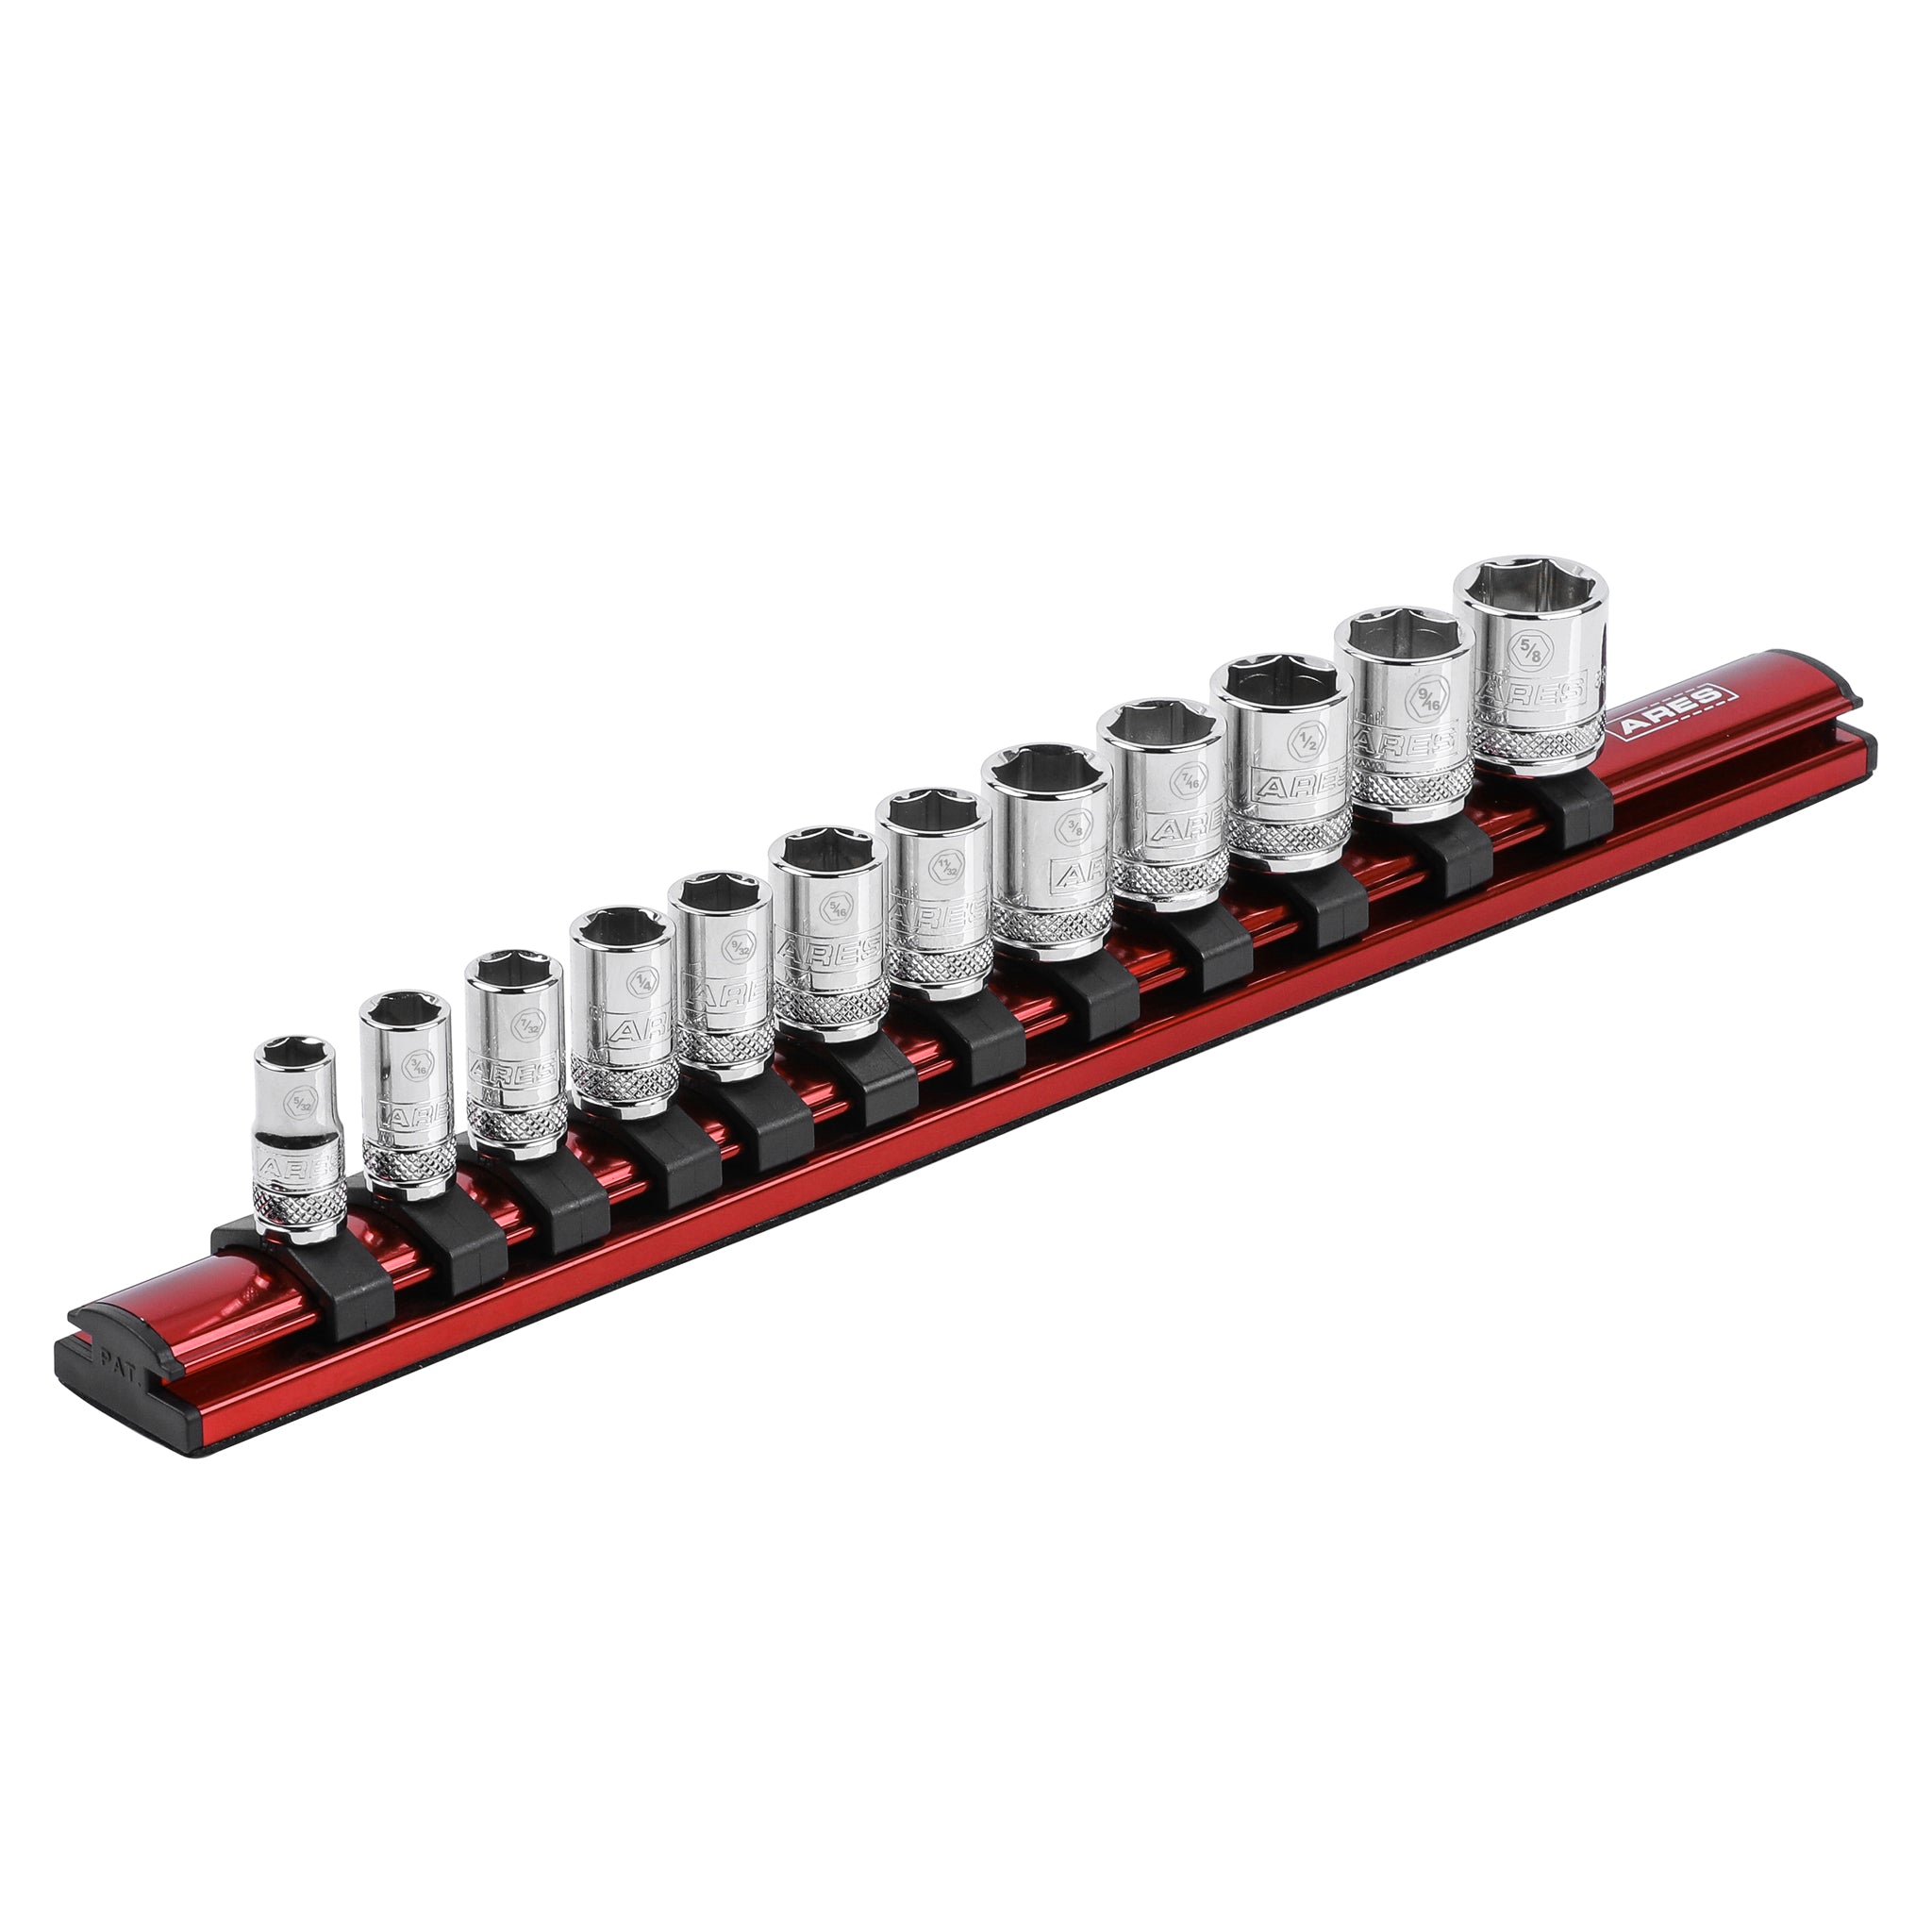 Toolworks 2-1/2 x 3-3/4 Magnetic Parts Tray - The Perfect Solution for Small, easy-to-lose Parts, TW249